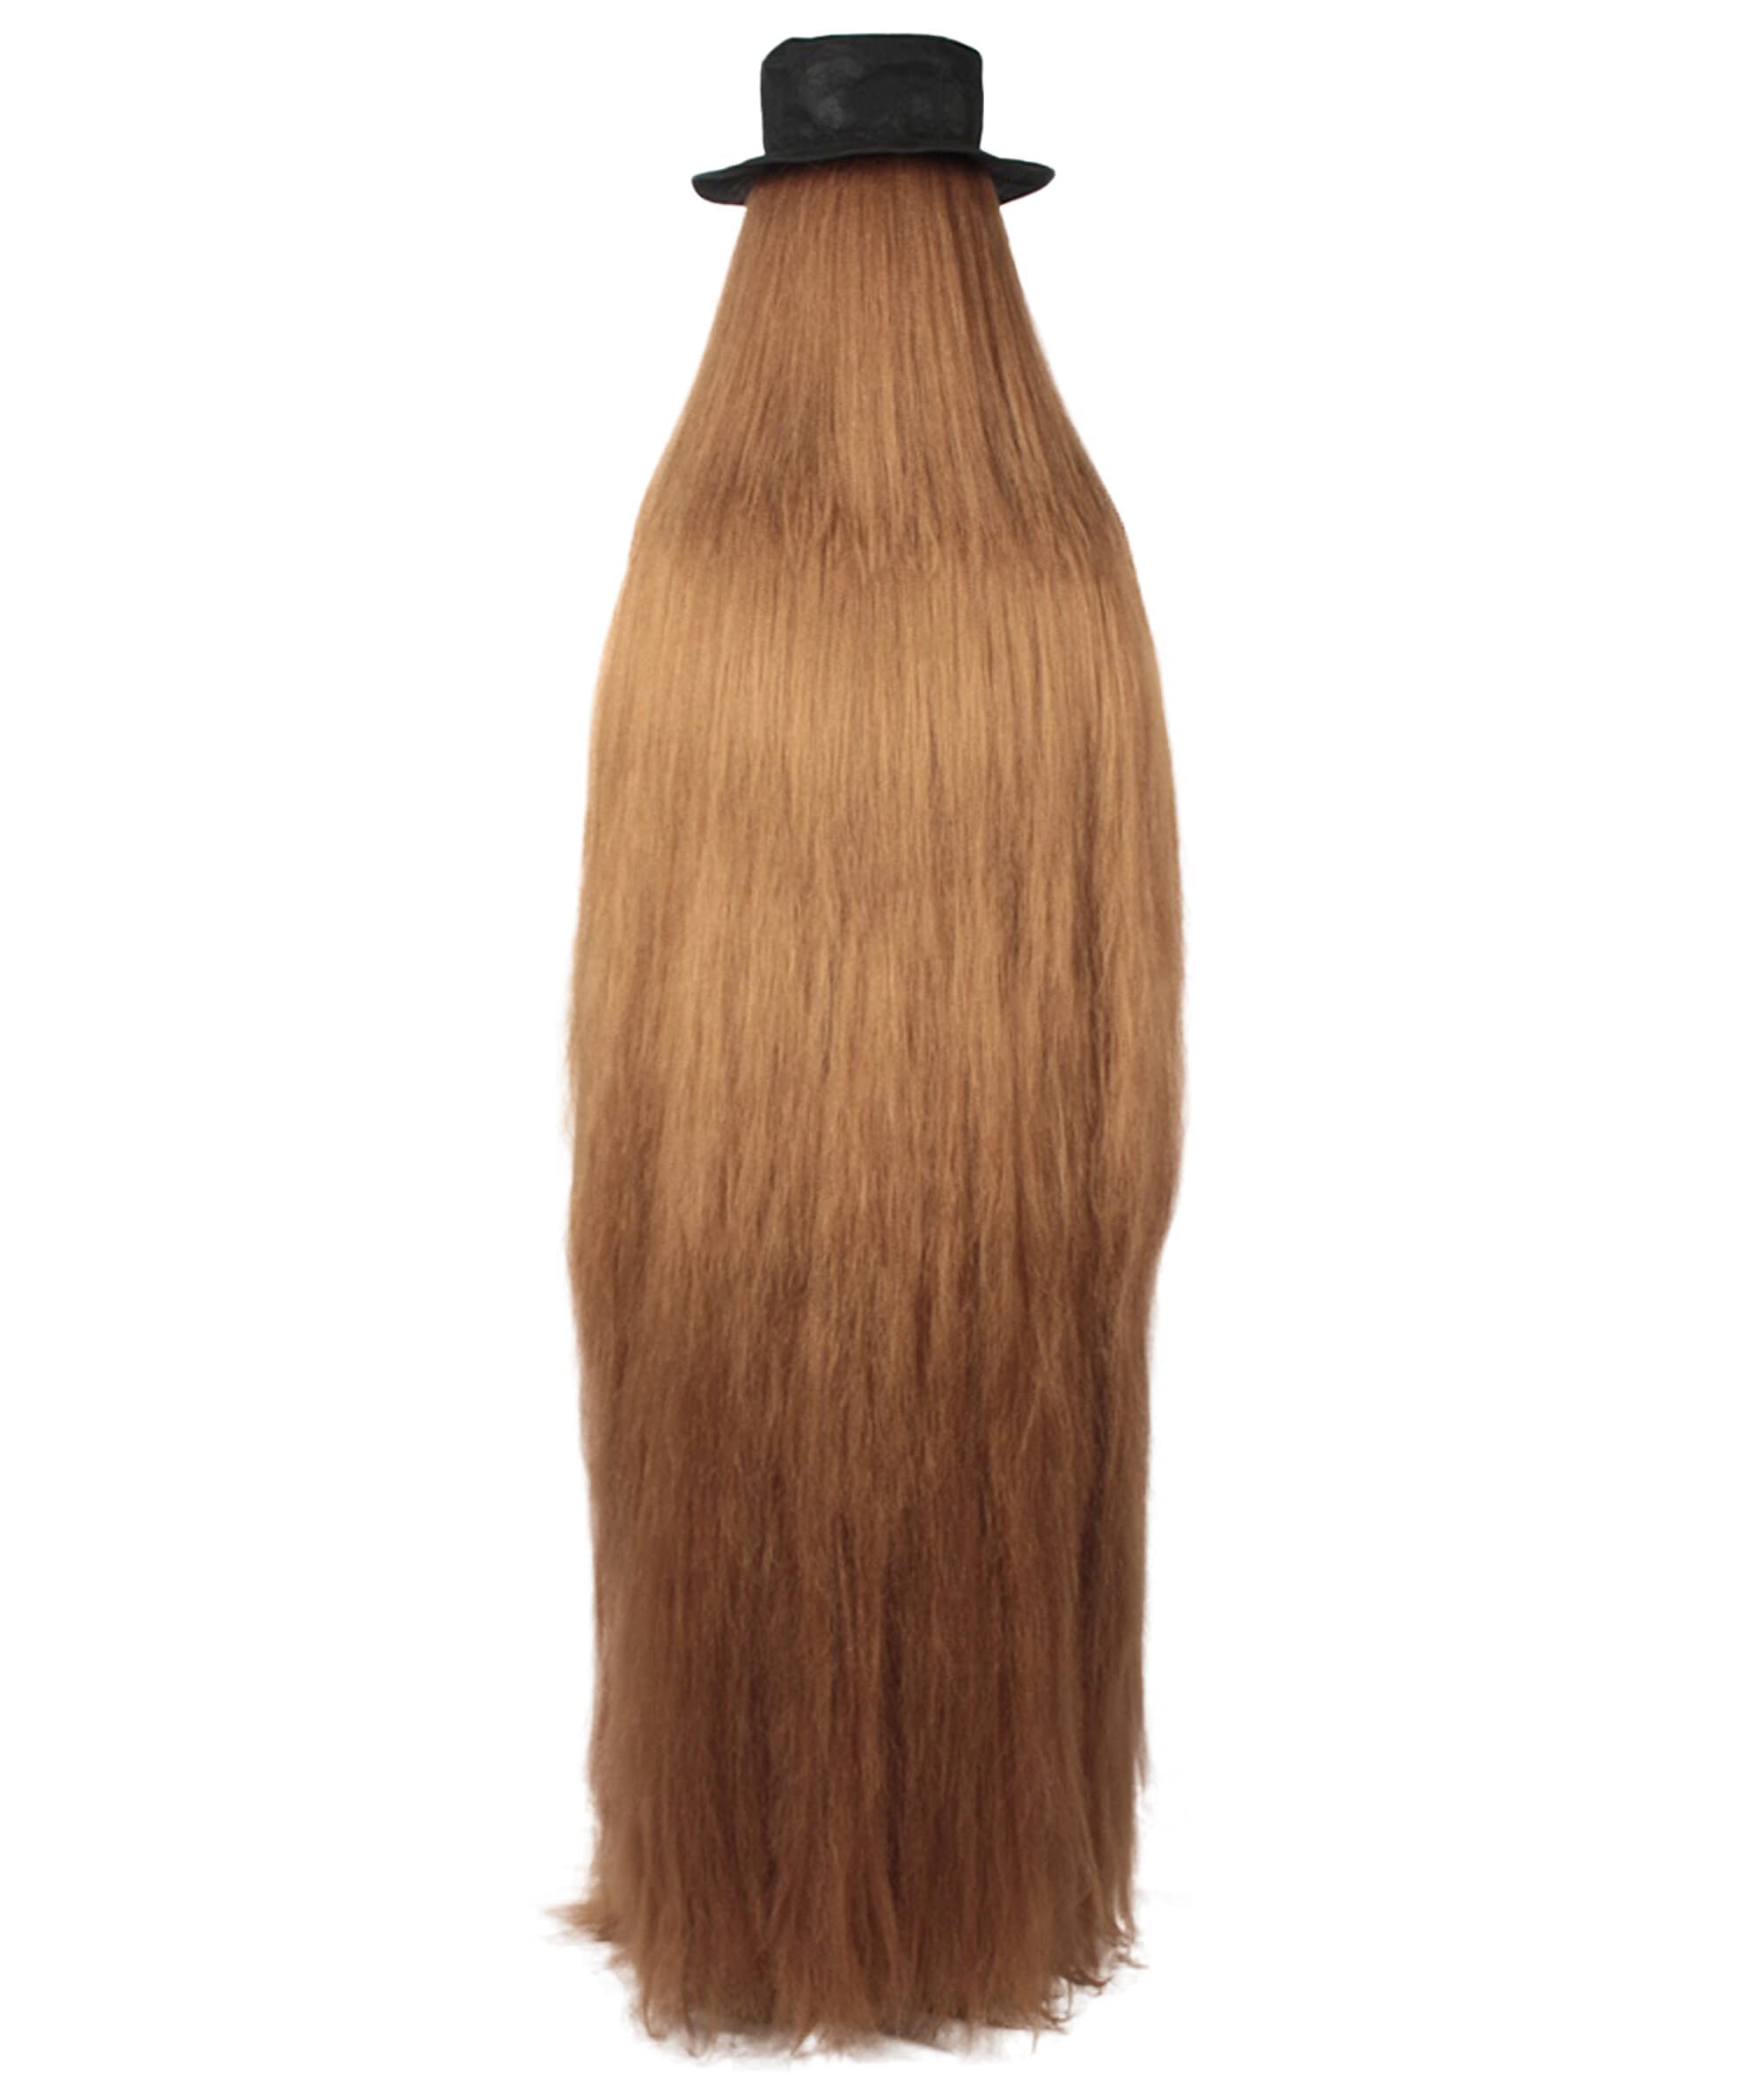 HPO Adult Unisex Cousin Itt Addams Family Dapper Creature Monster Halloween Costume, Synthetic Fiber, Brown - image 4 of 9